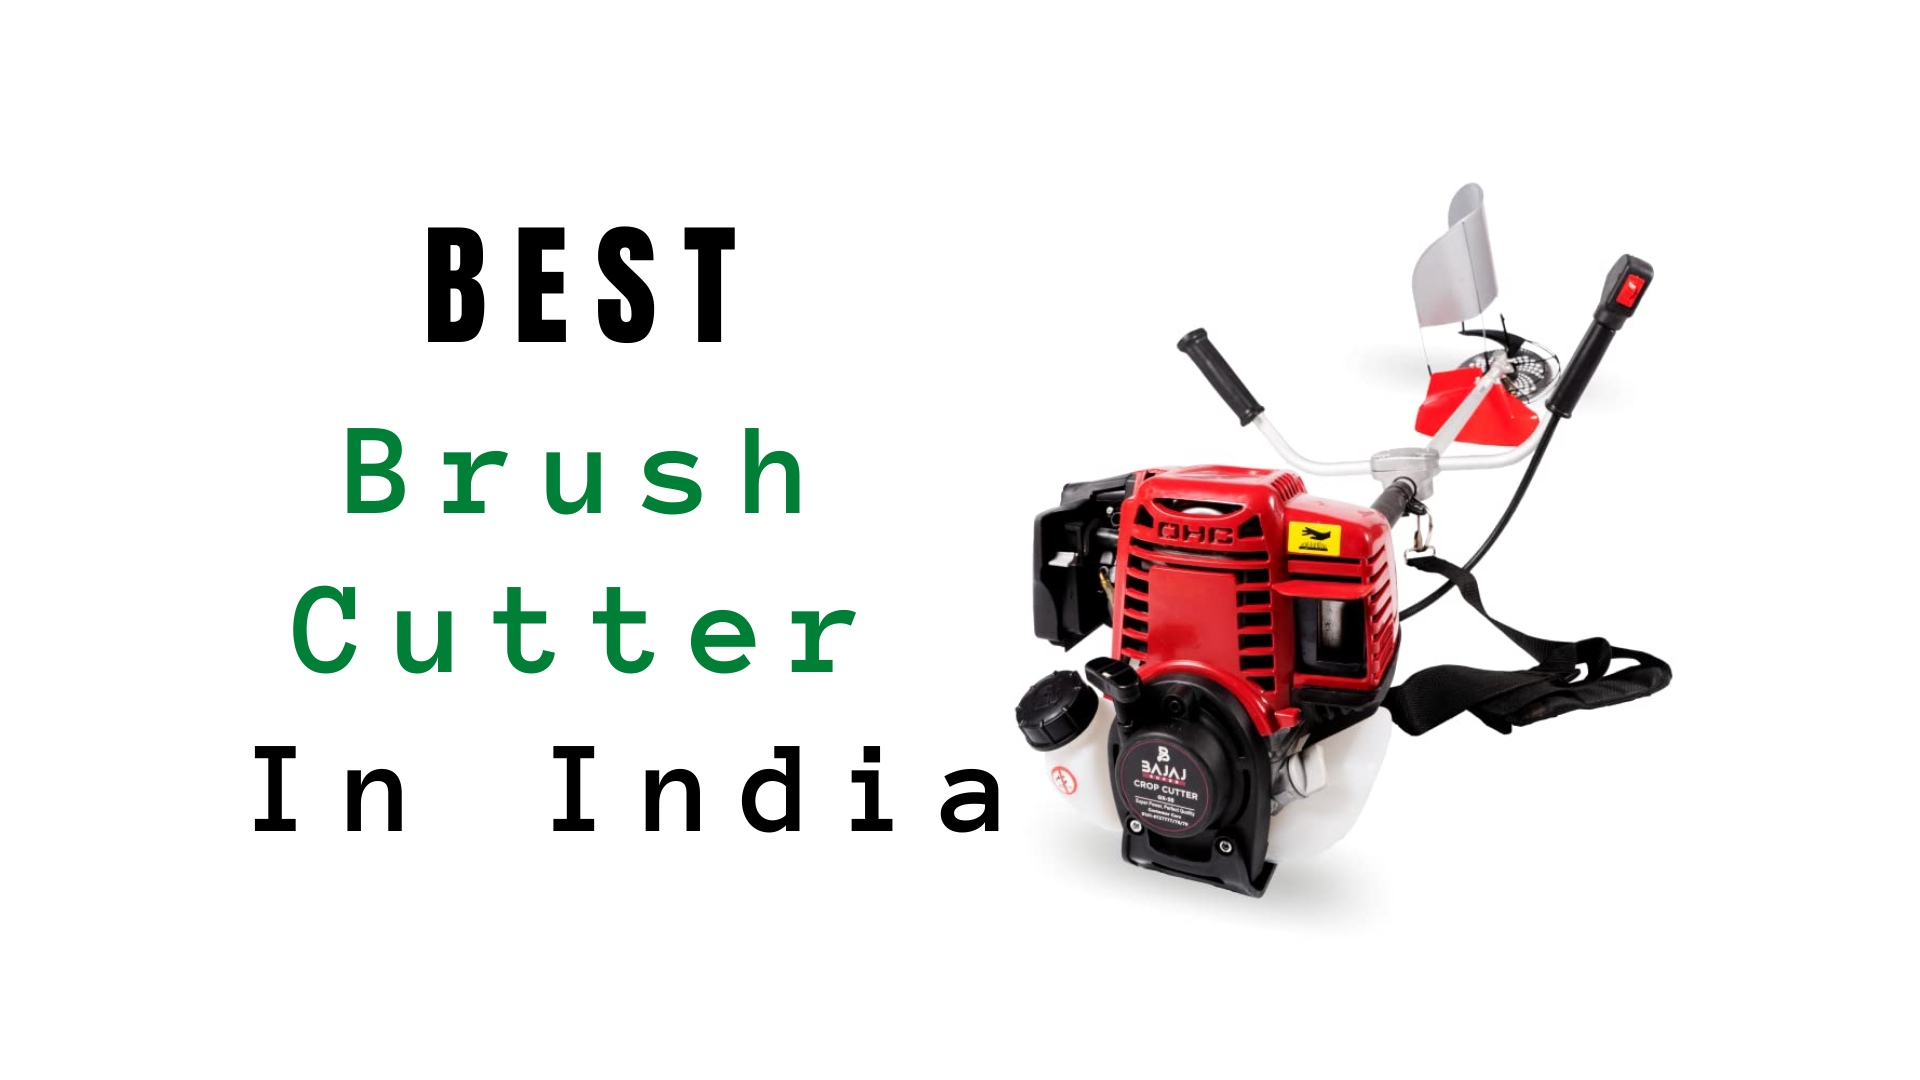 11 Best Brush Cutter In India - The Prices, Types And More